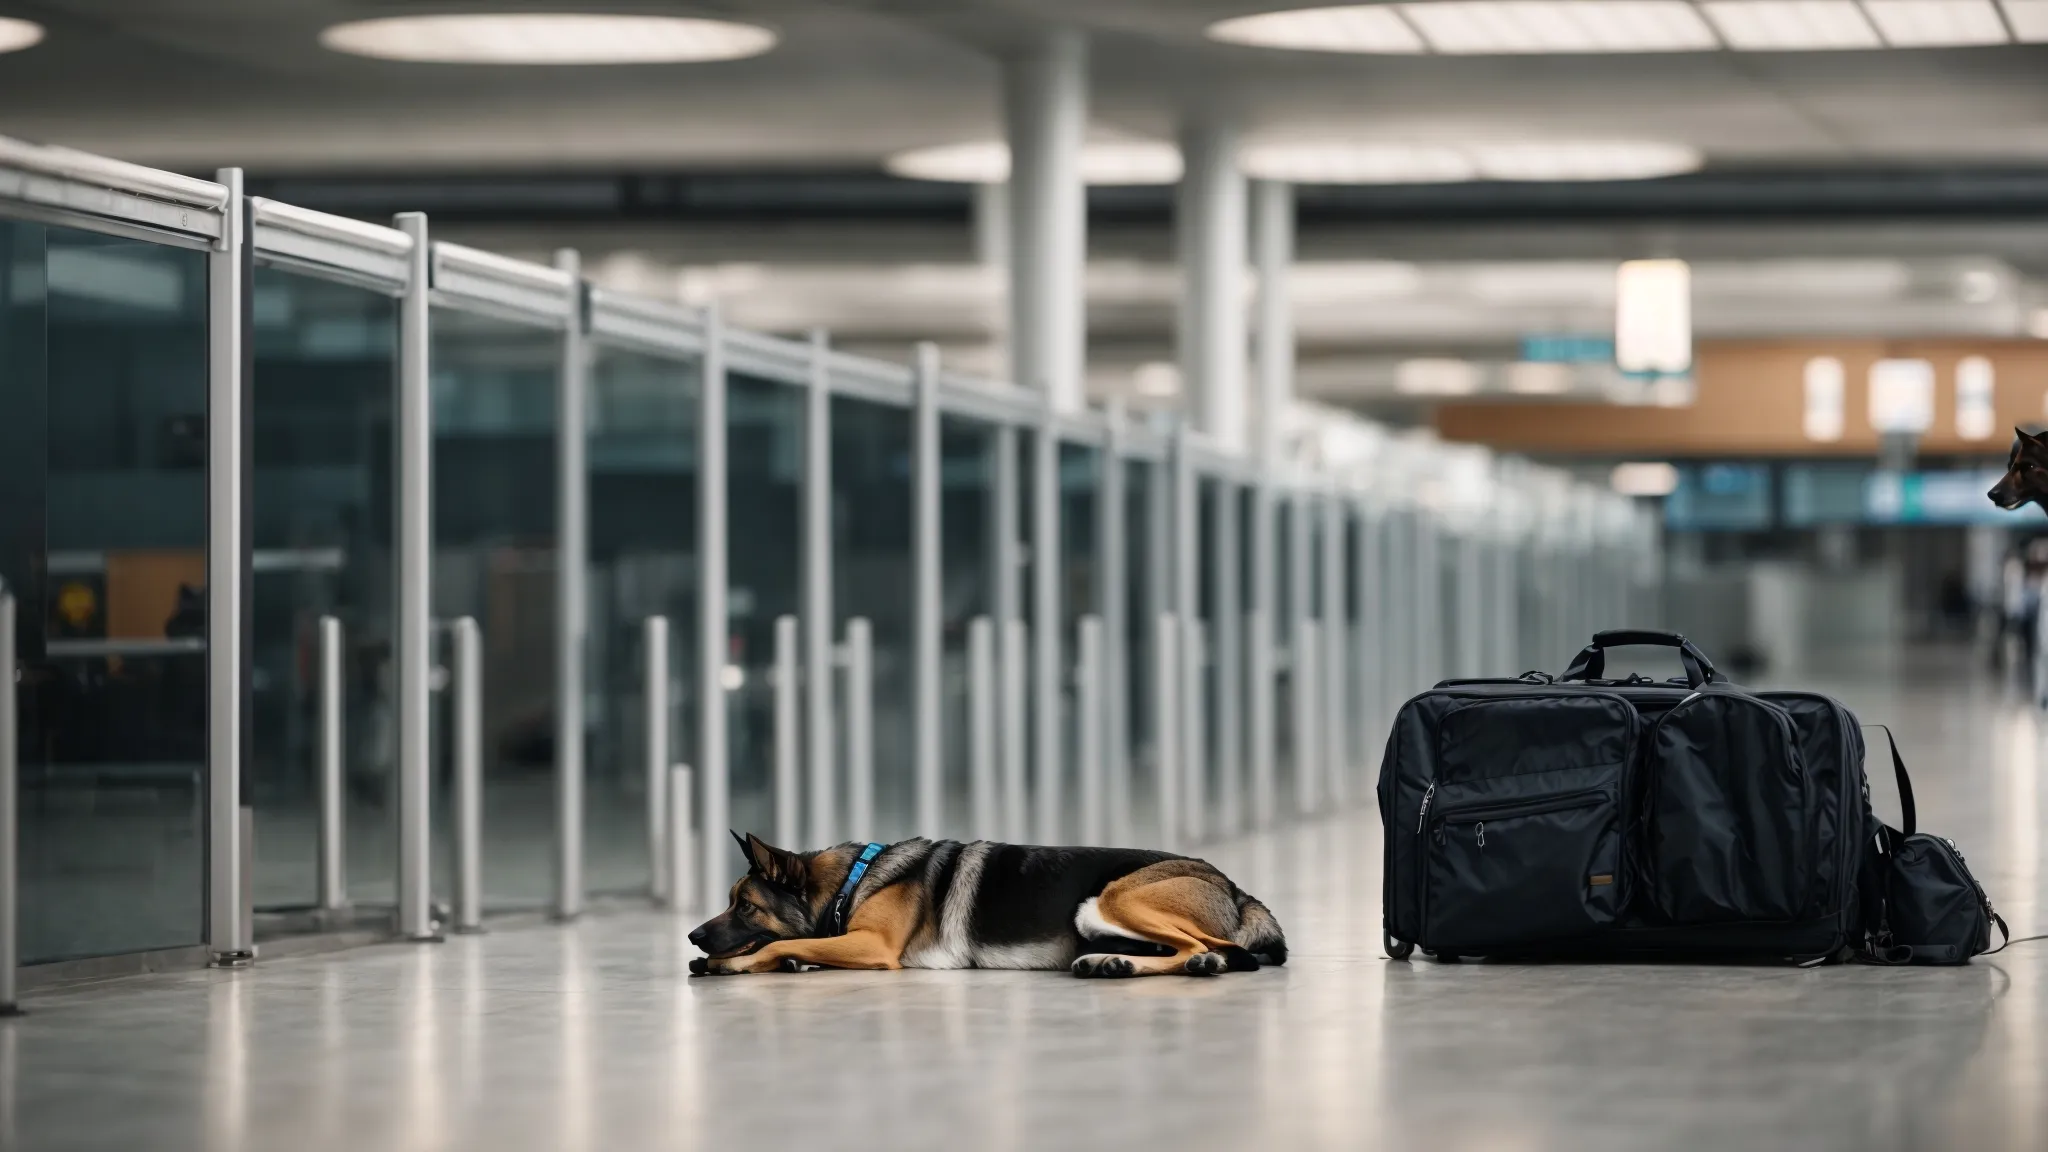 a diligent police dog sniffs luggage at an airport security checkpoint.